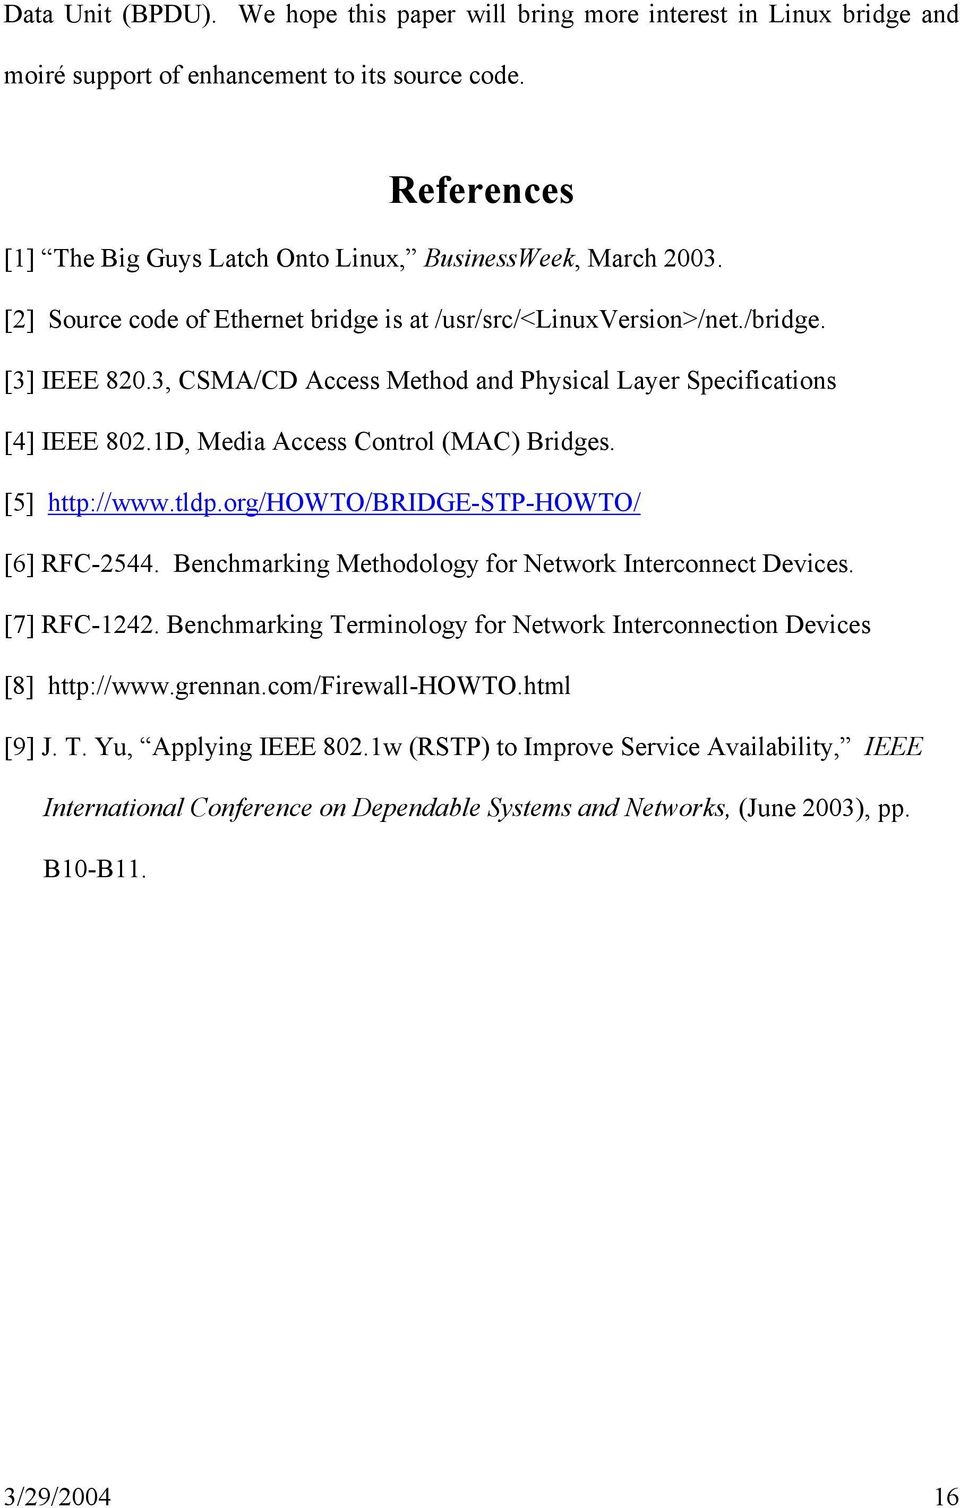 3, CSMA/CD Access Method and Physical Layer Specifications [4] IEEE 802.1D, Media Access Control (MAC) Bridges. [5] http://www.tldp.org/howto/bridge-stp-howto/ [6] RFC-2544.